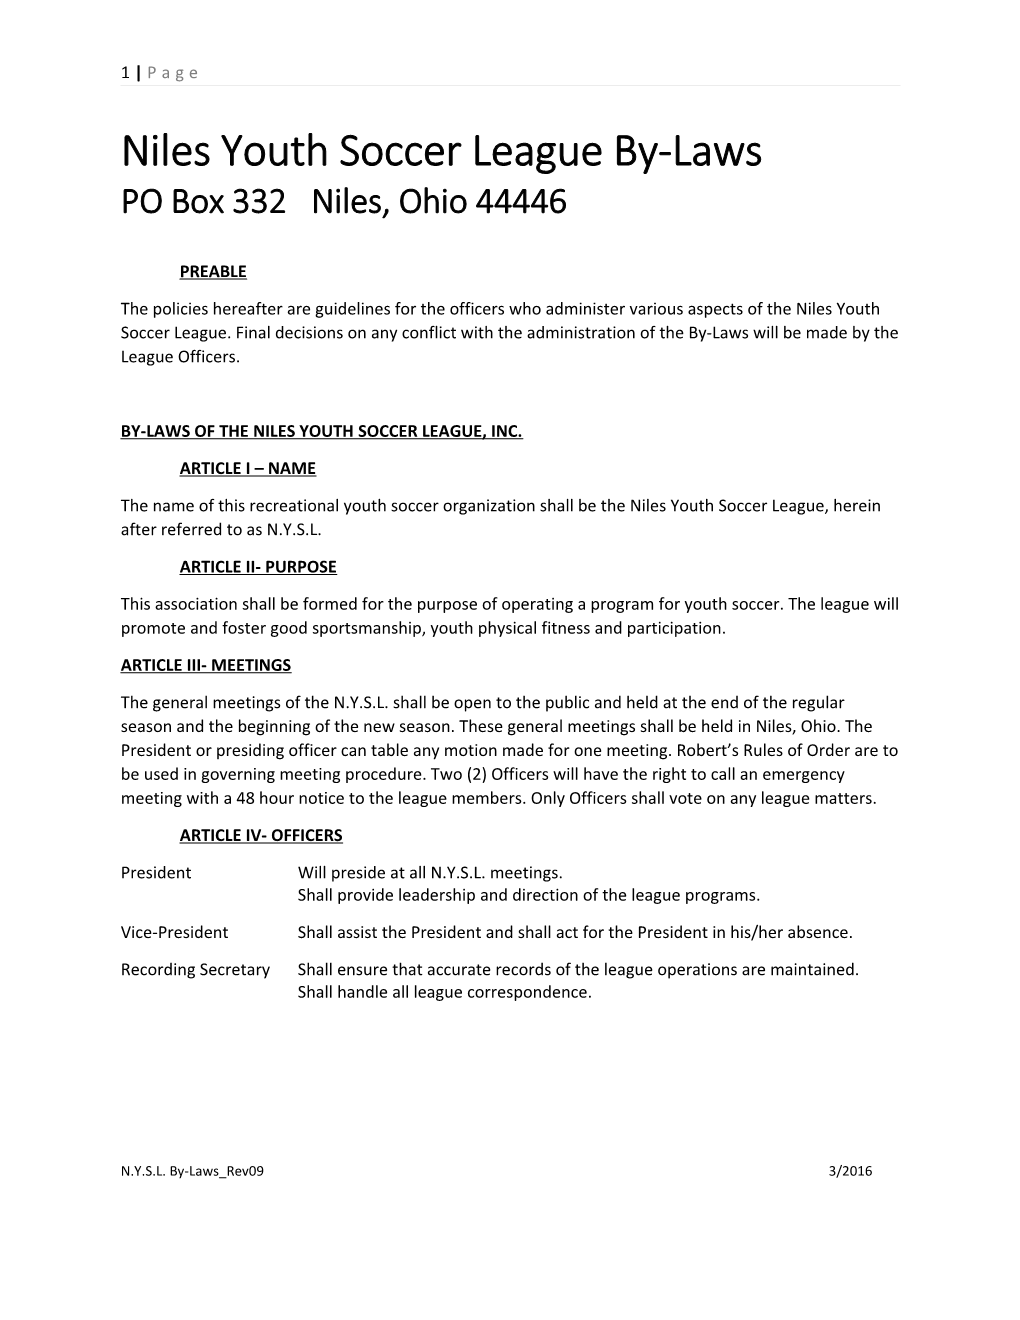 Niles Youth Soccer League By-Laws